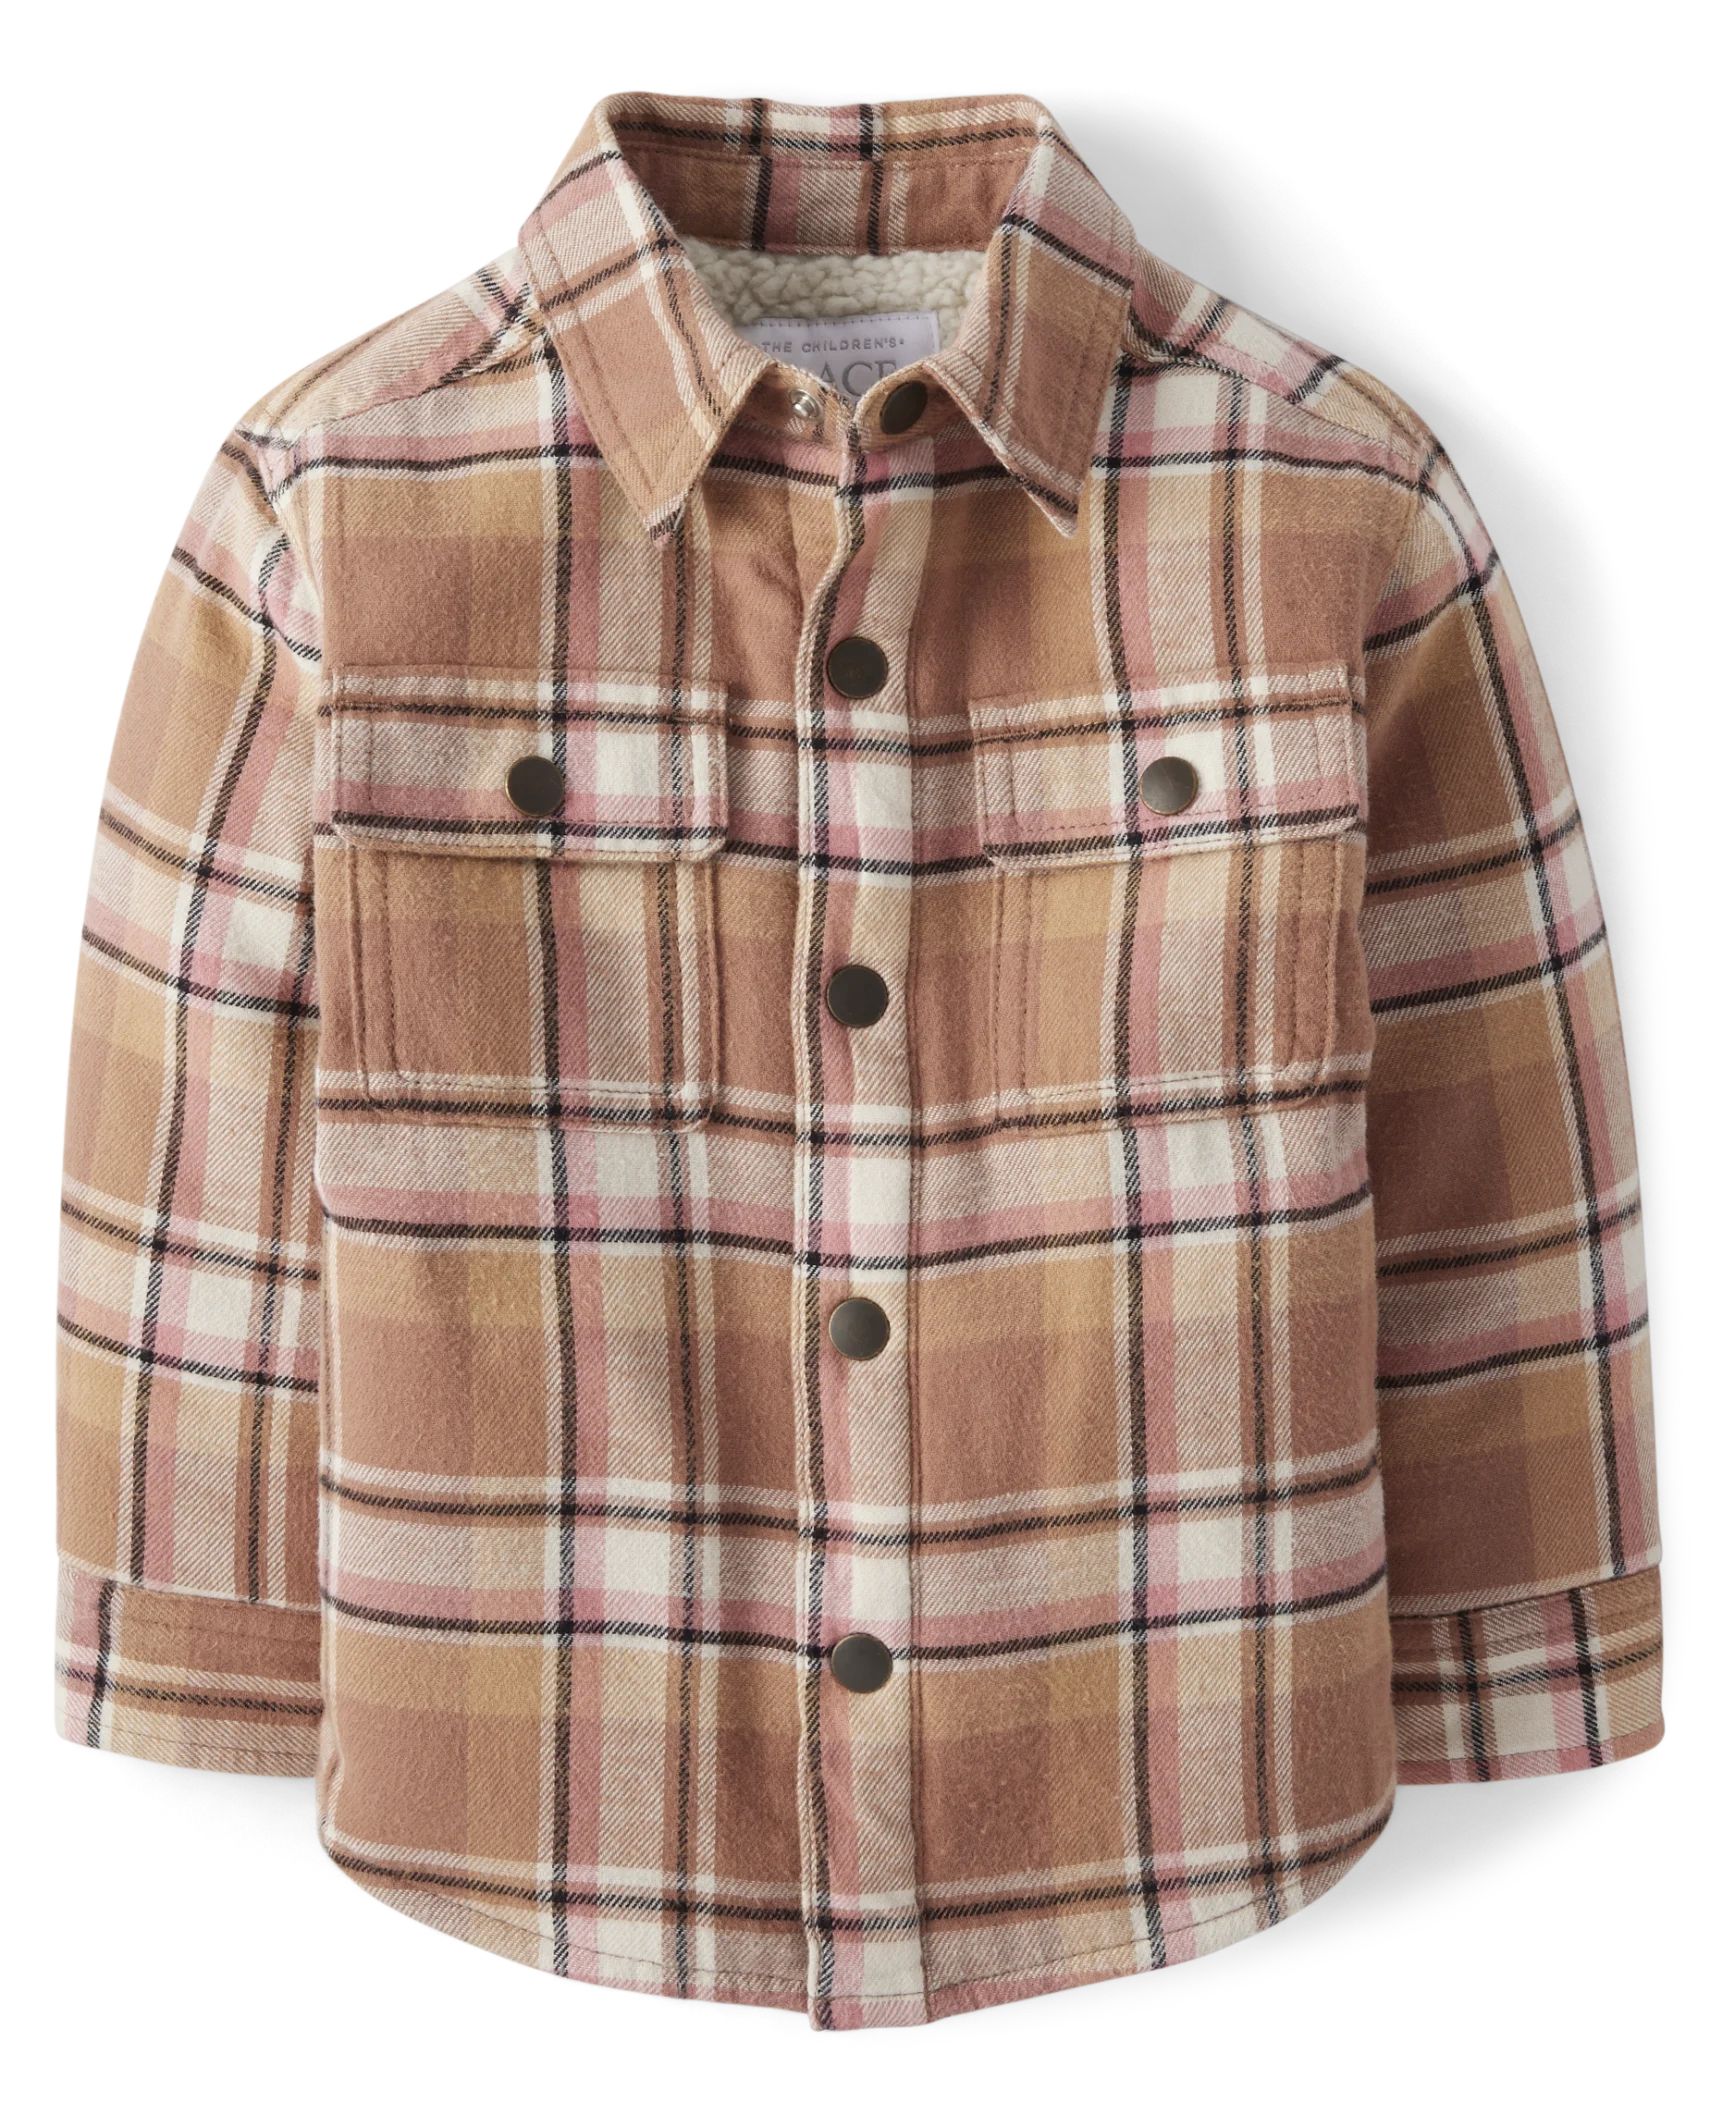 Toddler Girls Long Sleeve Plaid Sherpa-Lined Shacket | The Children's Place  - PECAN PIE | The Children's Place